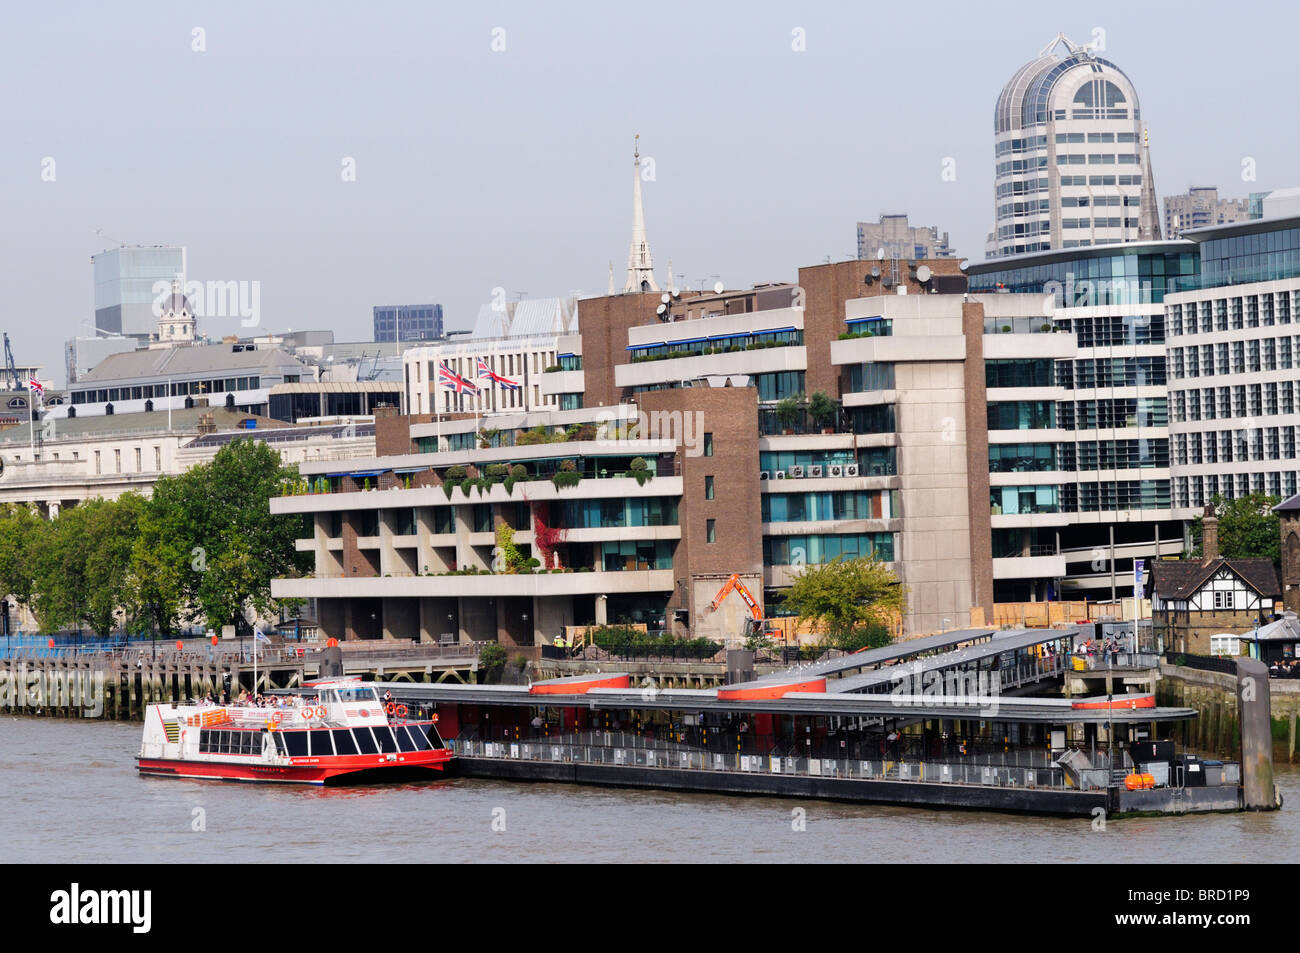 A City Cruises tourist sightseeing boat at Tower Pier, London, England, Uk Stock Photo